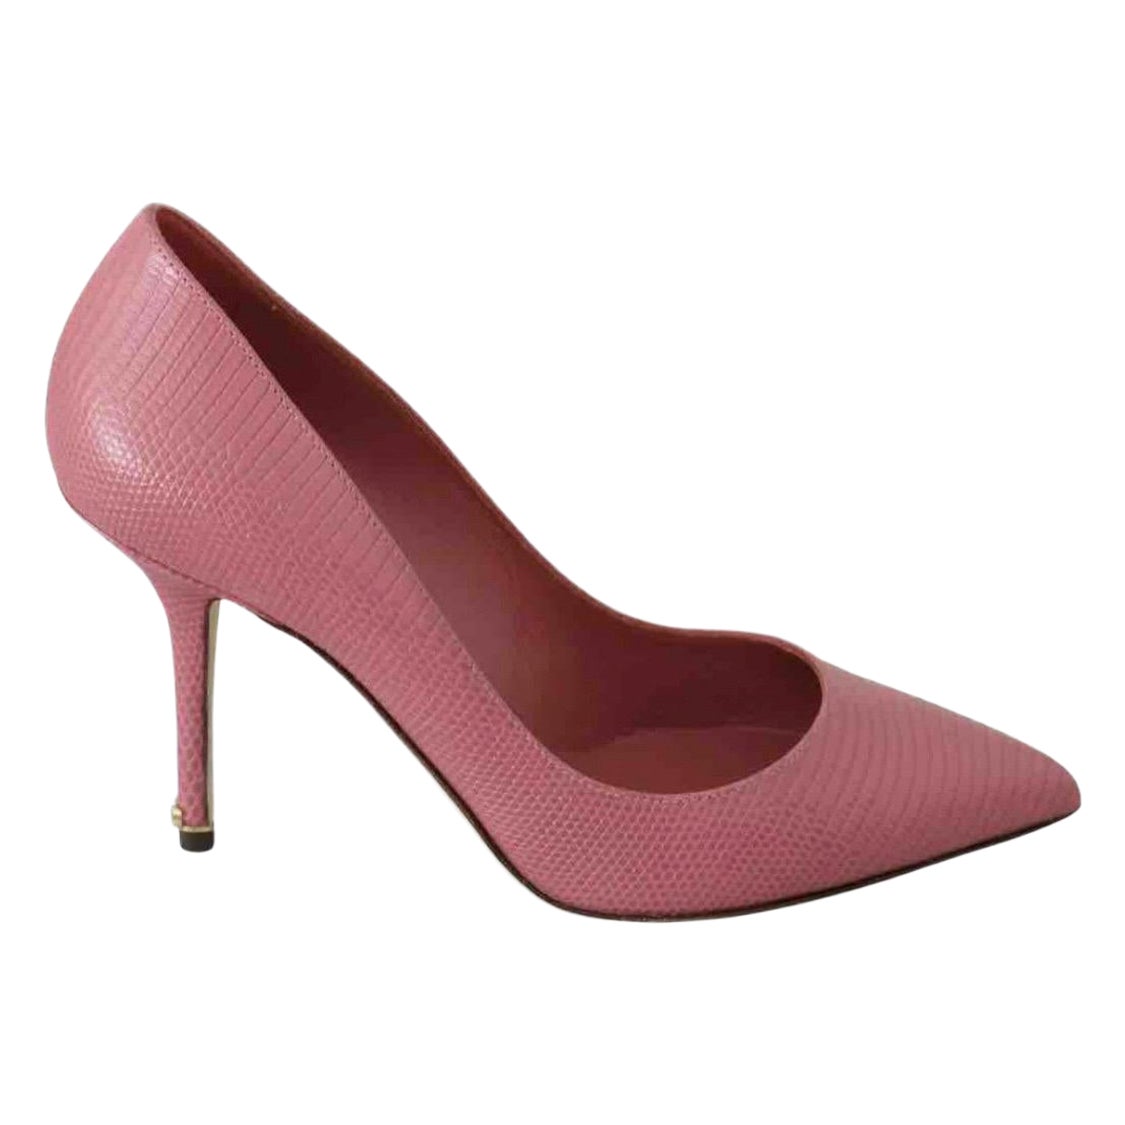 Dolce & Gabbana pink leather pointed toes heels pumps shoes For Sale